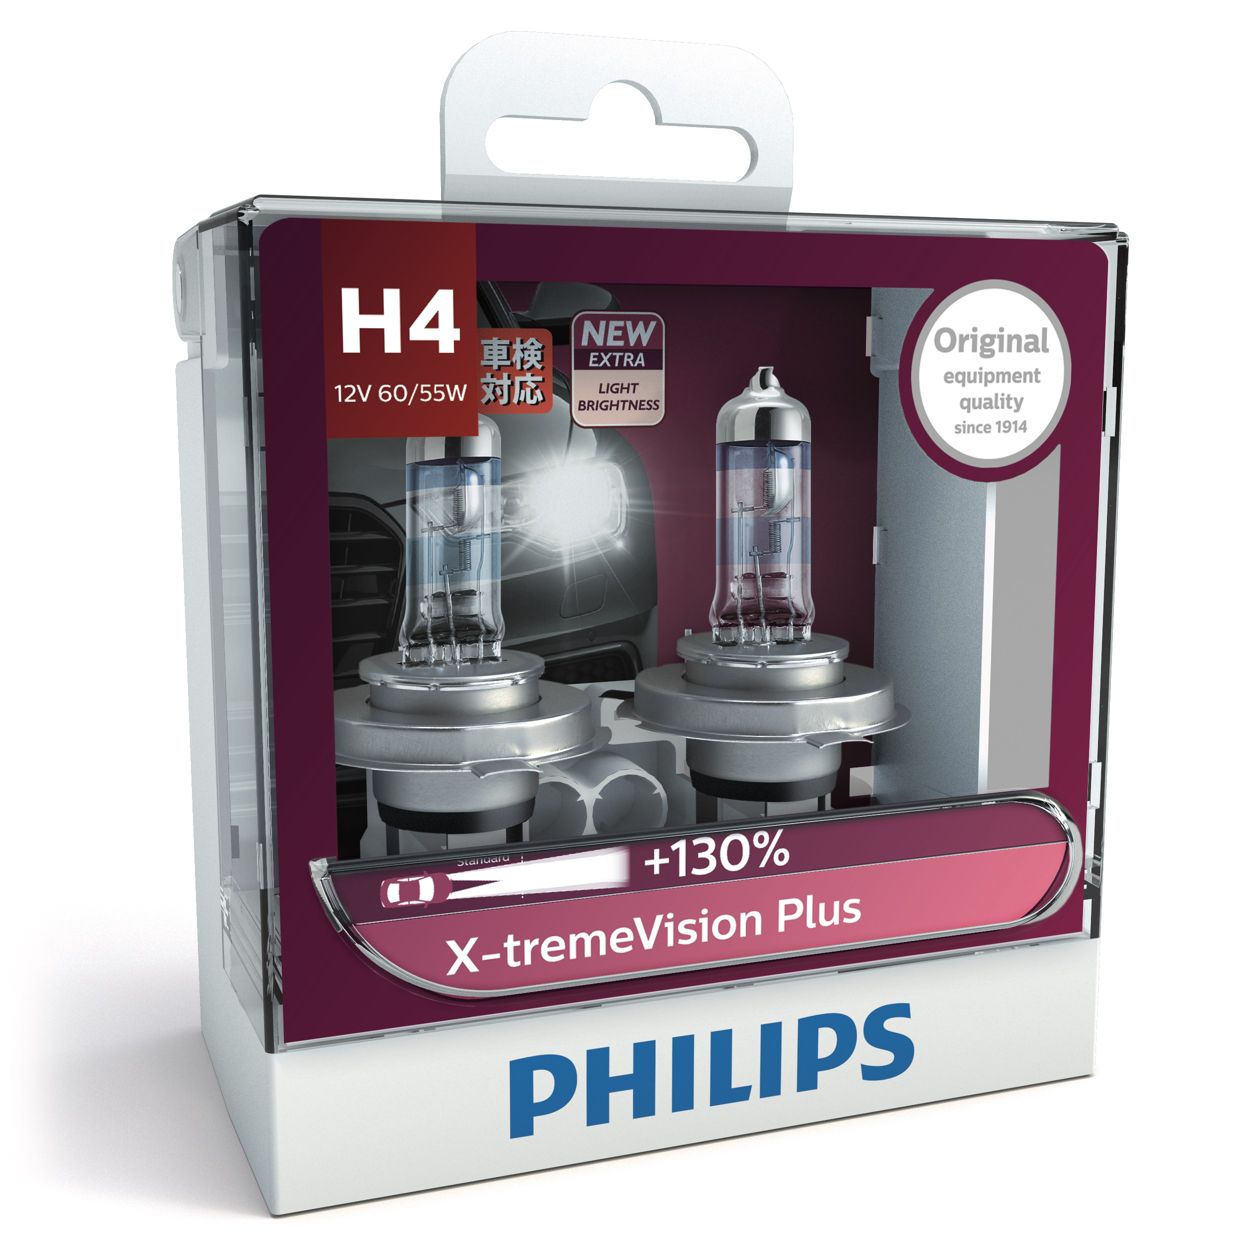 Philips h4 12v 60 55w. Philips h1 (55w) x-treme Vision. Philips Vision Plus h7. Philips - Vision Plus - h1. Philips Xtreme Vision h4.